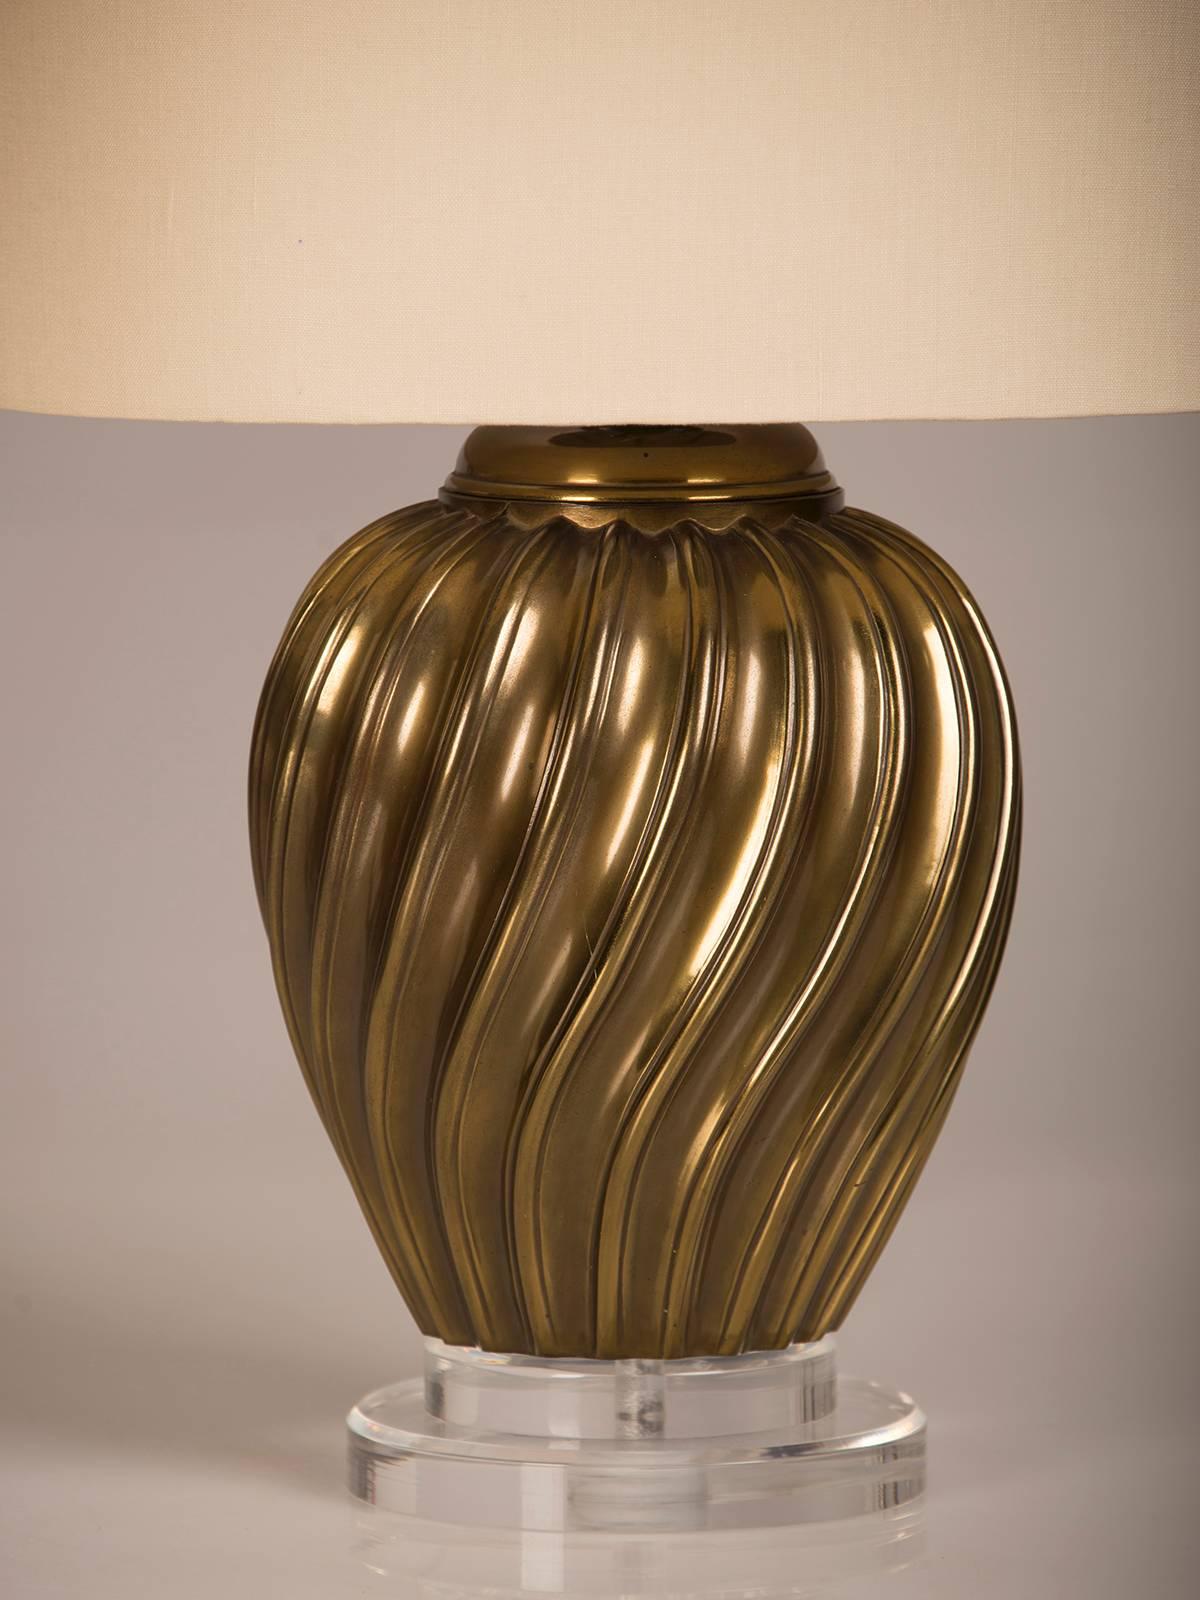 Pair of Italian Vintage Brass Swirl Vases Mounted as Custom Lamps, circa 1950 For Sale 3